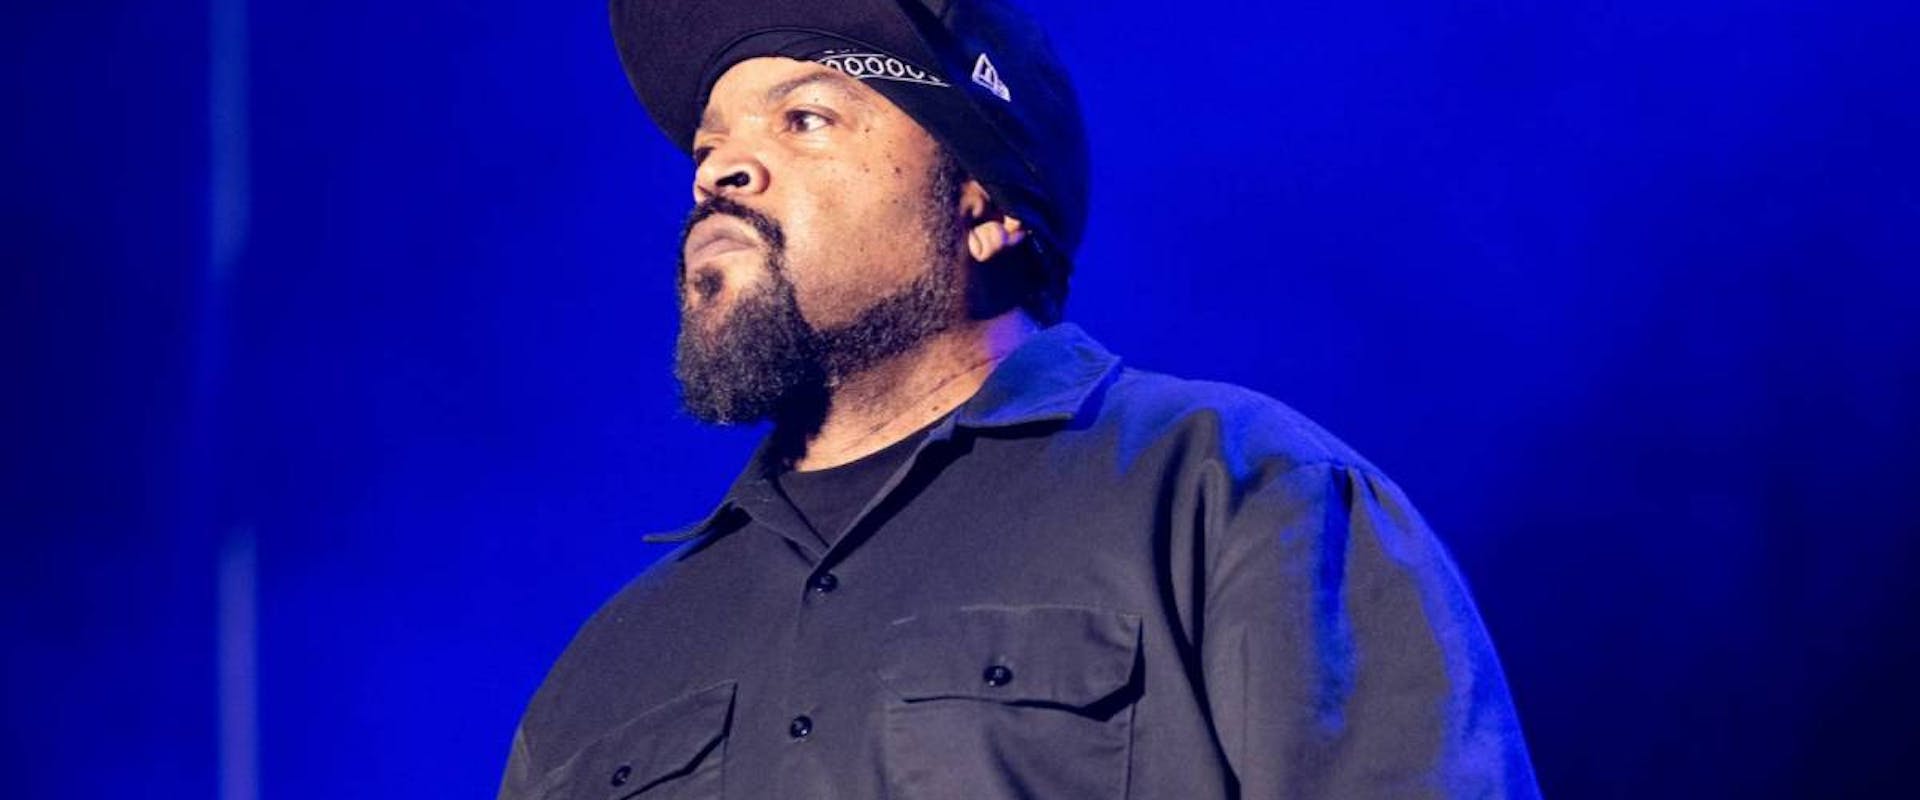 https://images.prismic.io/rockthebells/034b8bfd-7cf5-4f82-801e-32cdd8782130_Ice_Cube-1200x675.jpg?auto=compress,format&rect=0,88,1200,500&w=1920&h=800